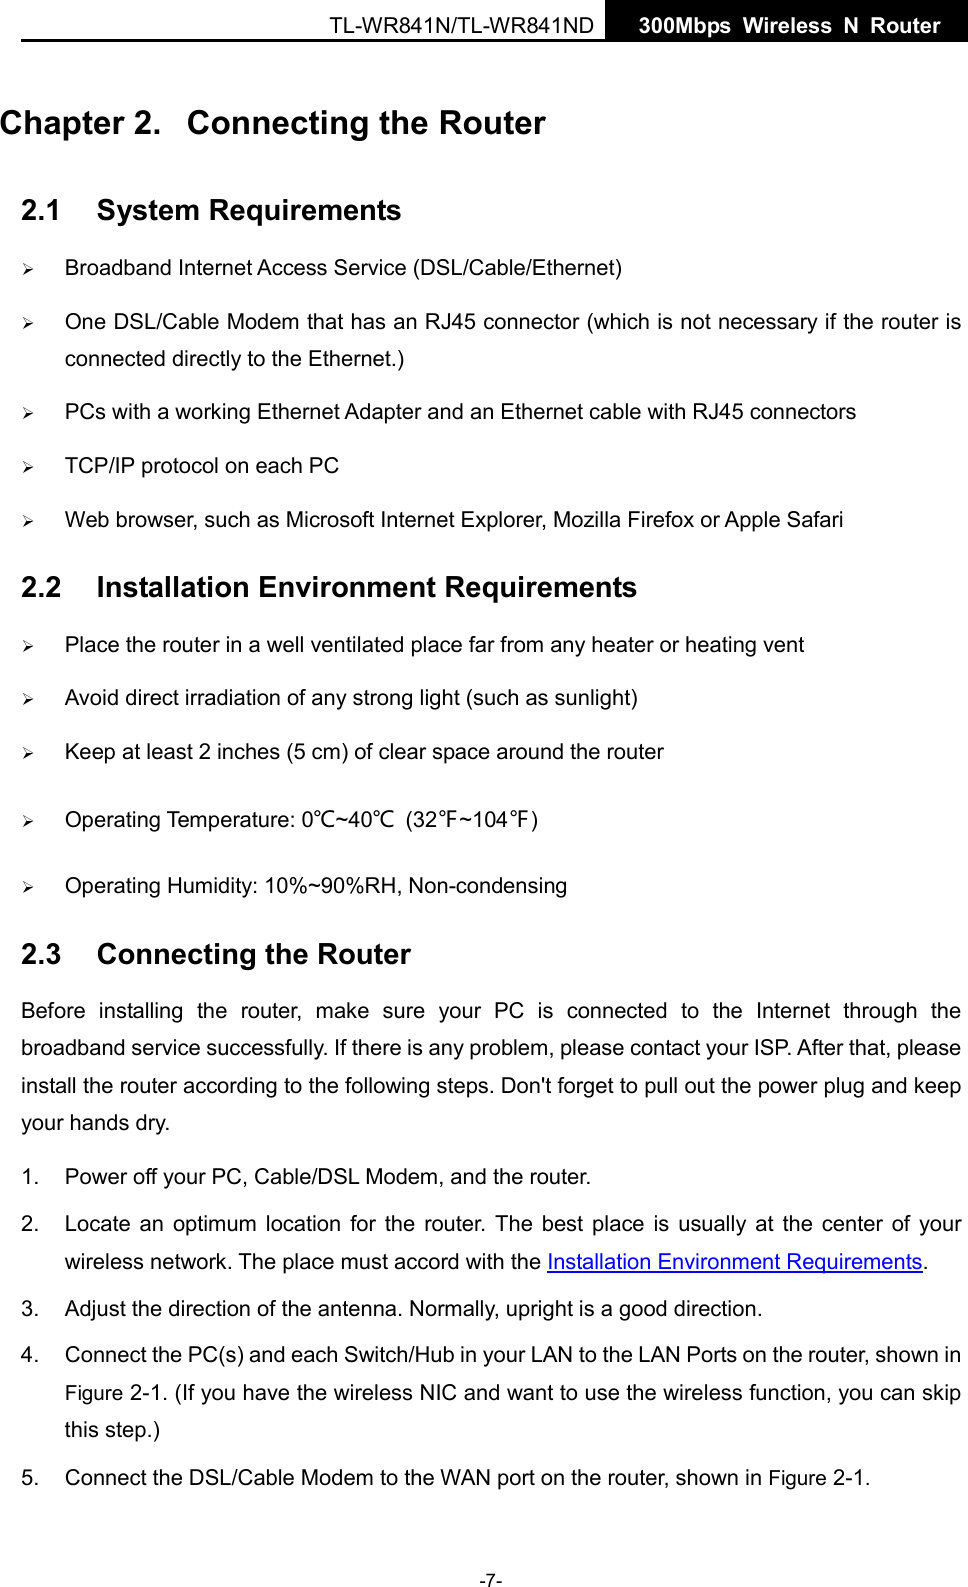  TL-WR841N/TL-WR841ND  300Mbps Wireless N  Router    Chapter 2.  Connecting the Router 2.1 System Requirements  Broadband Internet Access Service (DSL/Cable/Ethernet)  One DSL/Cable Modem that has an RJ45 connector (which is not necessary if the router is connected directly to the Ethernet.)  PCs with a working Ethernet Adapter and an Ethernet cable with RJ45 connectors    TCP/IP protocol on each PC  Web browser, such as Microsoft Internet Explorer, Mozilla Firefox or Apple Safari 2.2 Installation Environment Requirements  Place the router in a well ventilated place far from any heater or heating vent    Avoid direct irradiation of any strong light (such as sunlight)  Keep at least 2 inches (5 cm) of clear space around the router  Operating Temperature: 0℃~40℃ (32℉~104℉)  Operating Humidity: 10%~90%RH, Non-condensing 2.3 Connecting the Router Before installing the  router,  make sure your PC is  connected to the Internet through the broadband service successfully. If there is any problem, please contact your ISP. After that, please install the router according to the following steps. Don&apos;t forget to pull out the power plug and keep your hands dry. 1. Power off your PC, Cable/DSL Modem, and the router.   2. Locate an optimum location for the router. The best place is usually at the center of your wireless network. The place must accord with the Installation Environment Requirements.   3. Adjust the direction of the antenna. Normally, upright is a good direction. 4. Connect the PC(s) and each Switch/Hub in your LAN to the LAN Ports on the router, shown in Figure 2-1. (If you have the wireless NIC and want to use the wireless function, you can skip this step.) 5. Connect the DSL/Cable Modem to the WAN port on the router, shown in Figure 2-1. -7- 